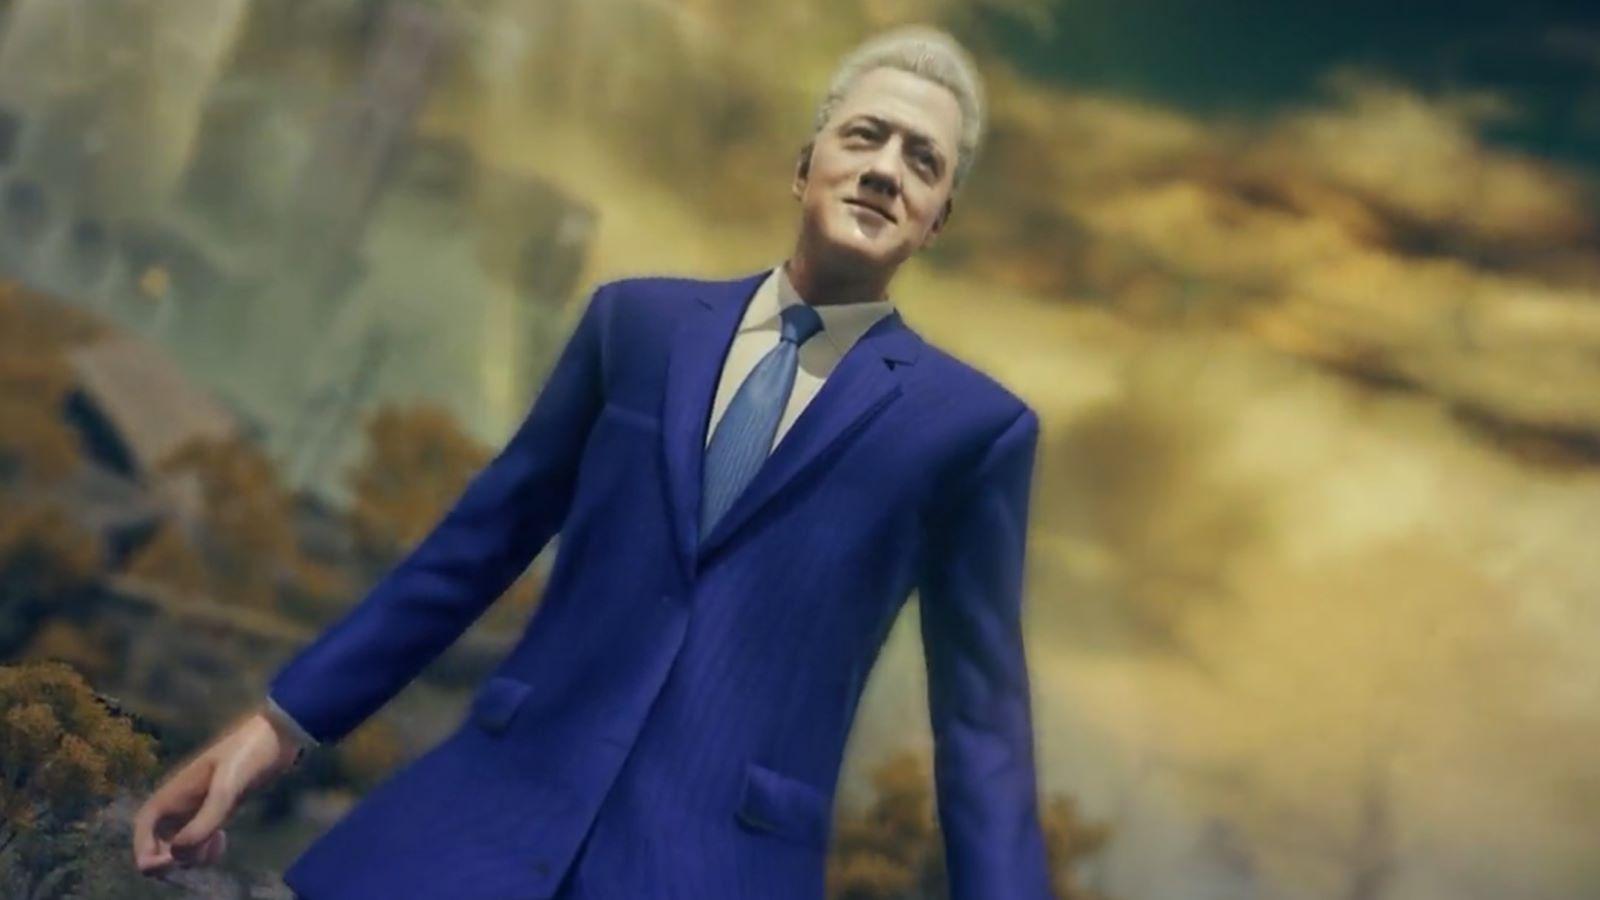 New Elden Ring Mod Brings Bill Clinton To The Game After Interesting Game  Awards Moment